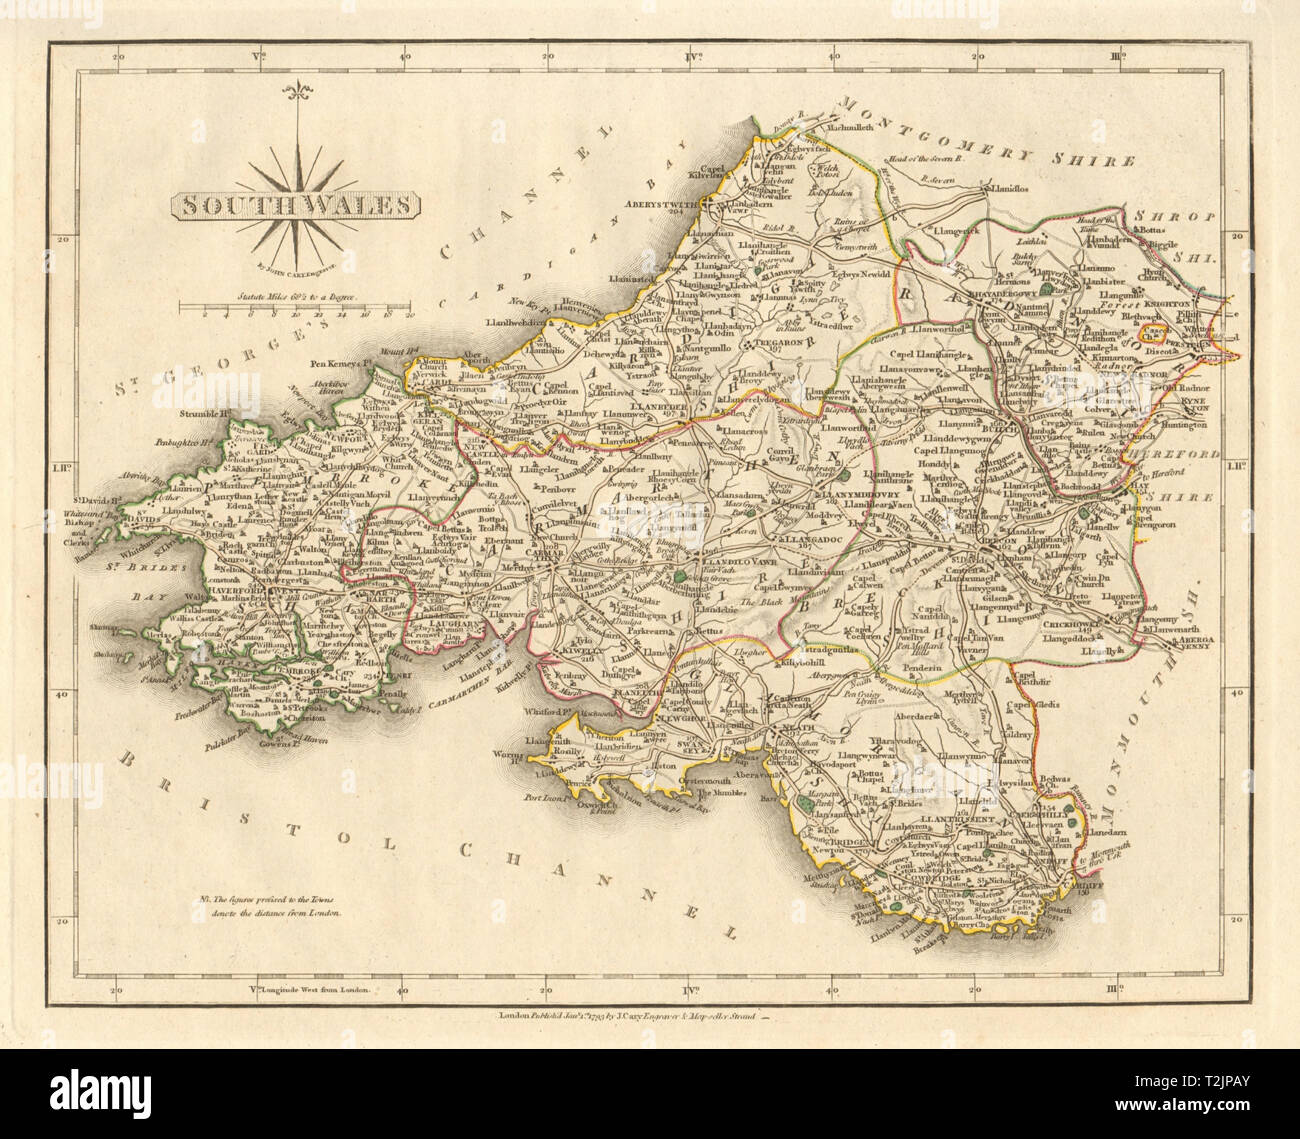 Antique Map Of South Wales By John Cary Original Outline Colour 1793